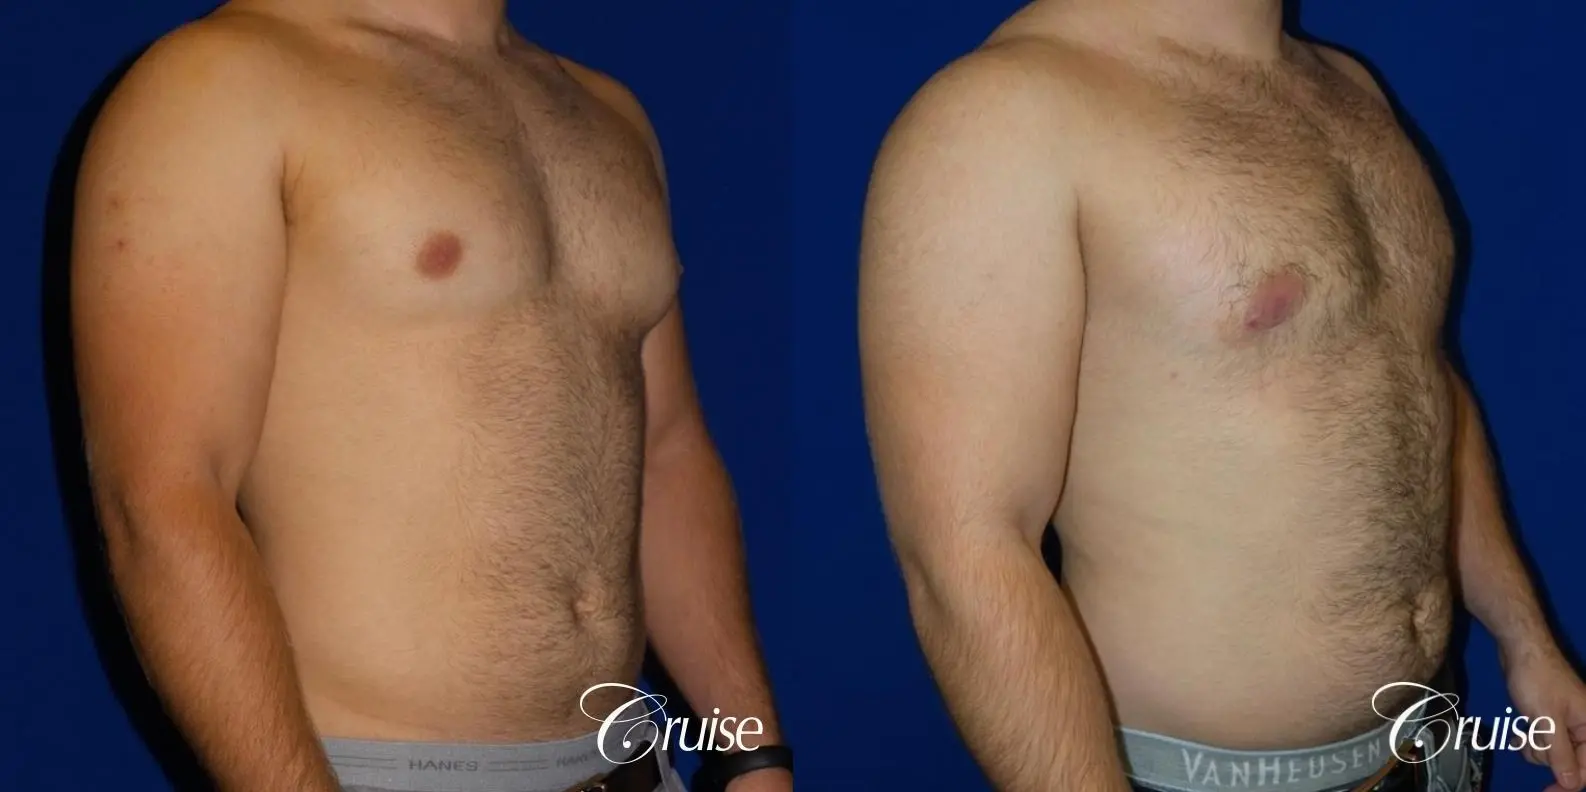 best gynecomastia results - Before and After 4